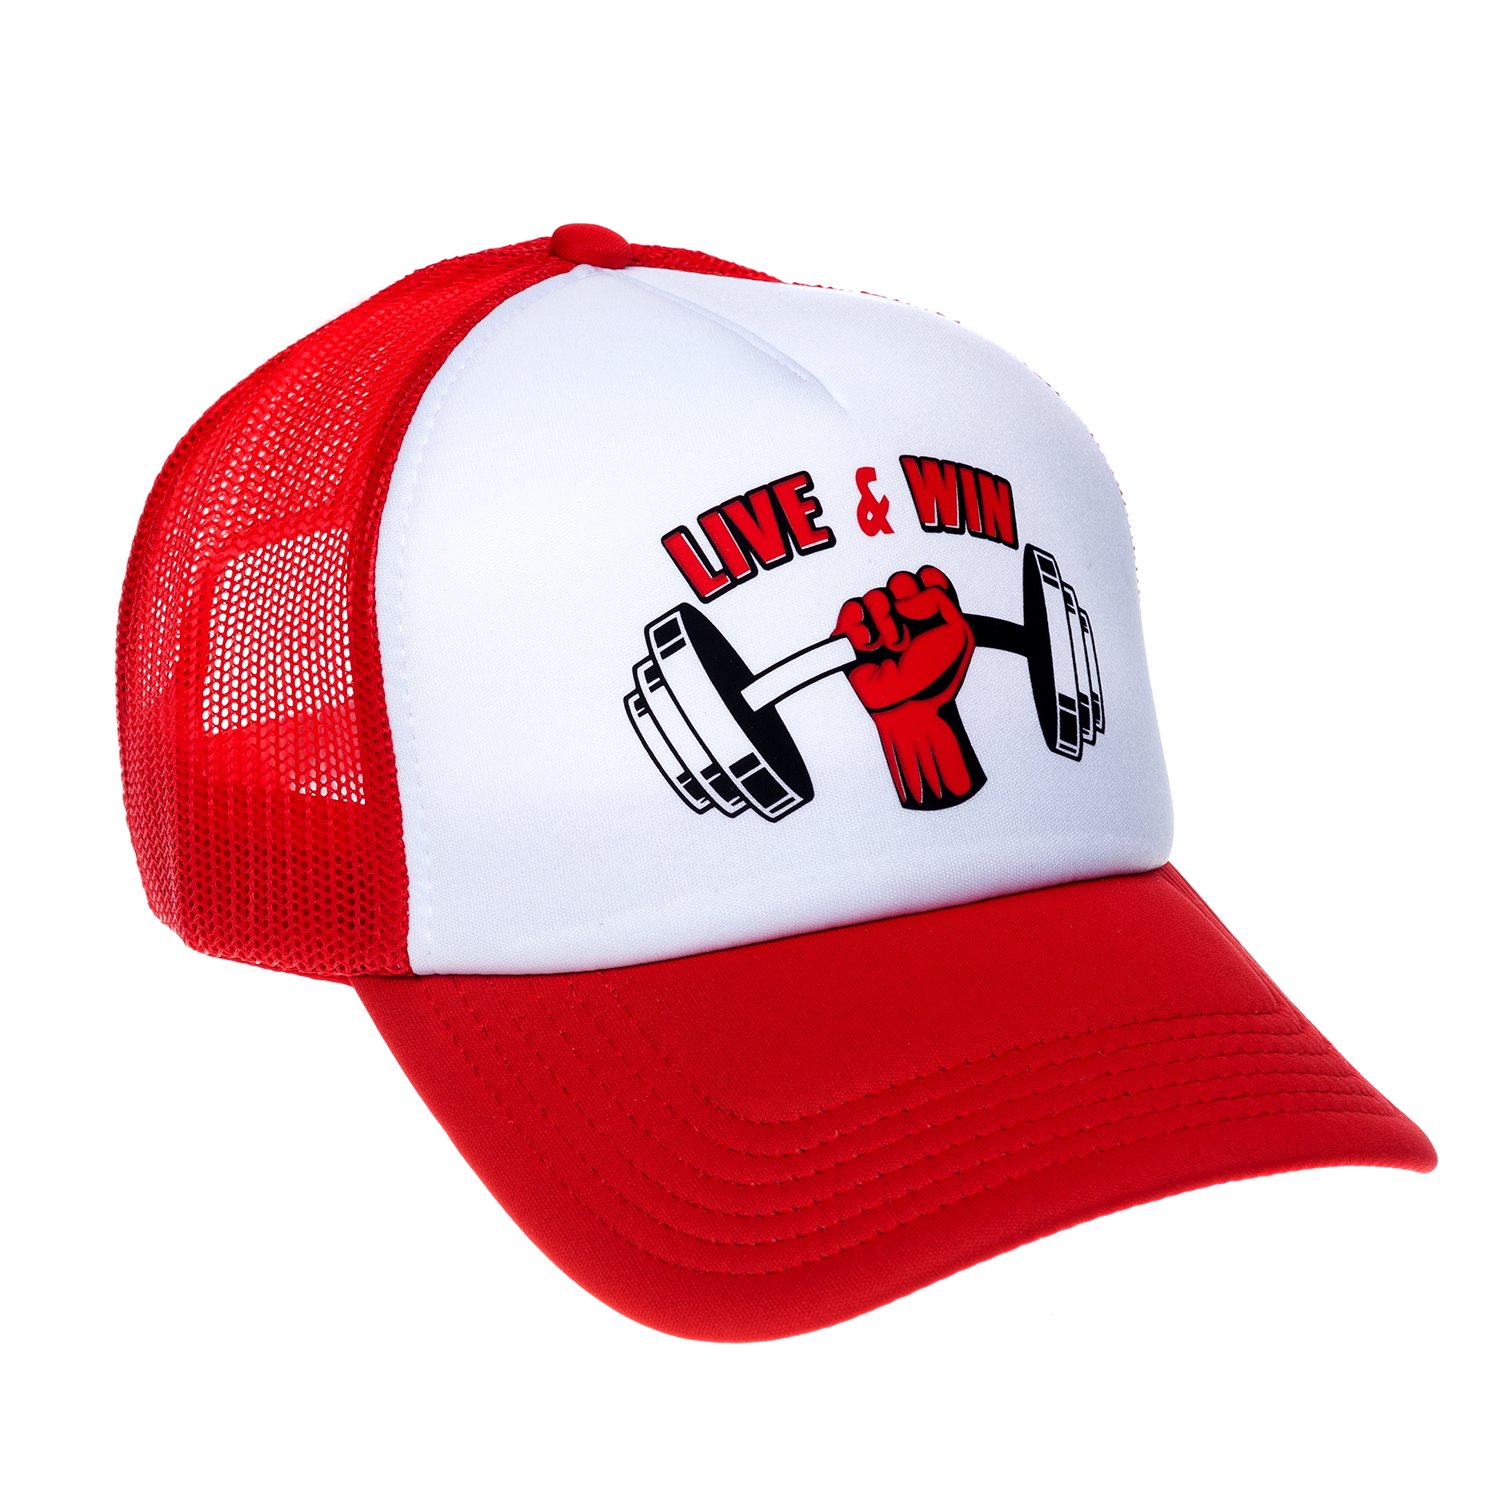 Baseball cap Live&Win, red, with hand